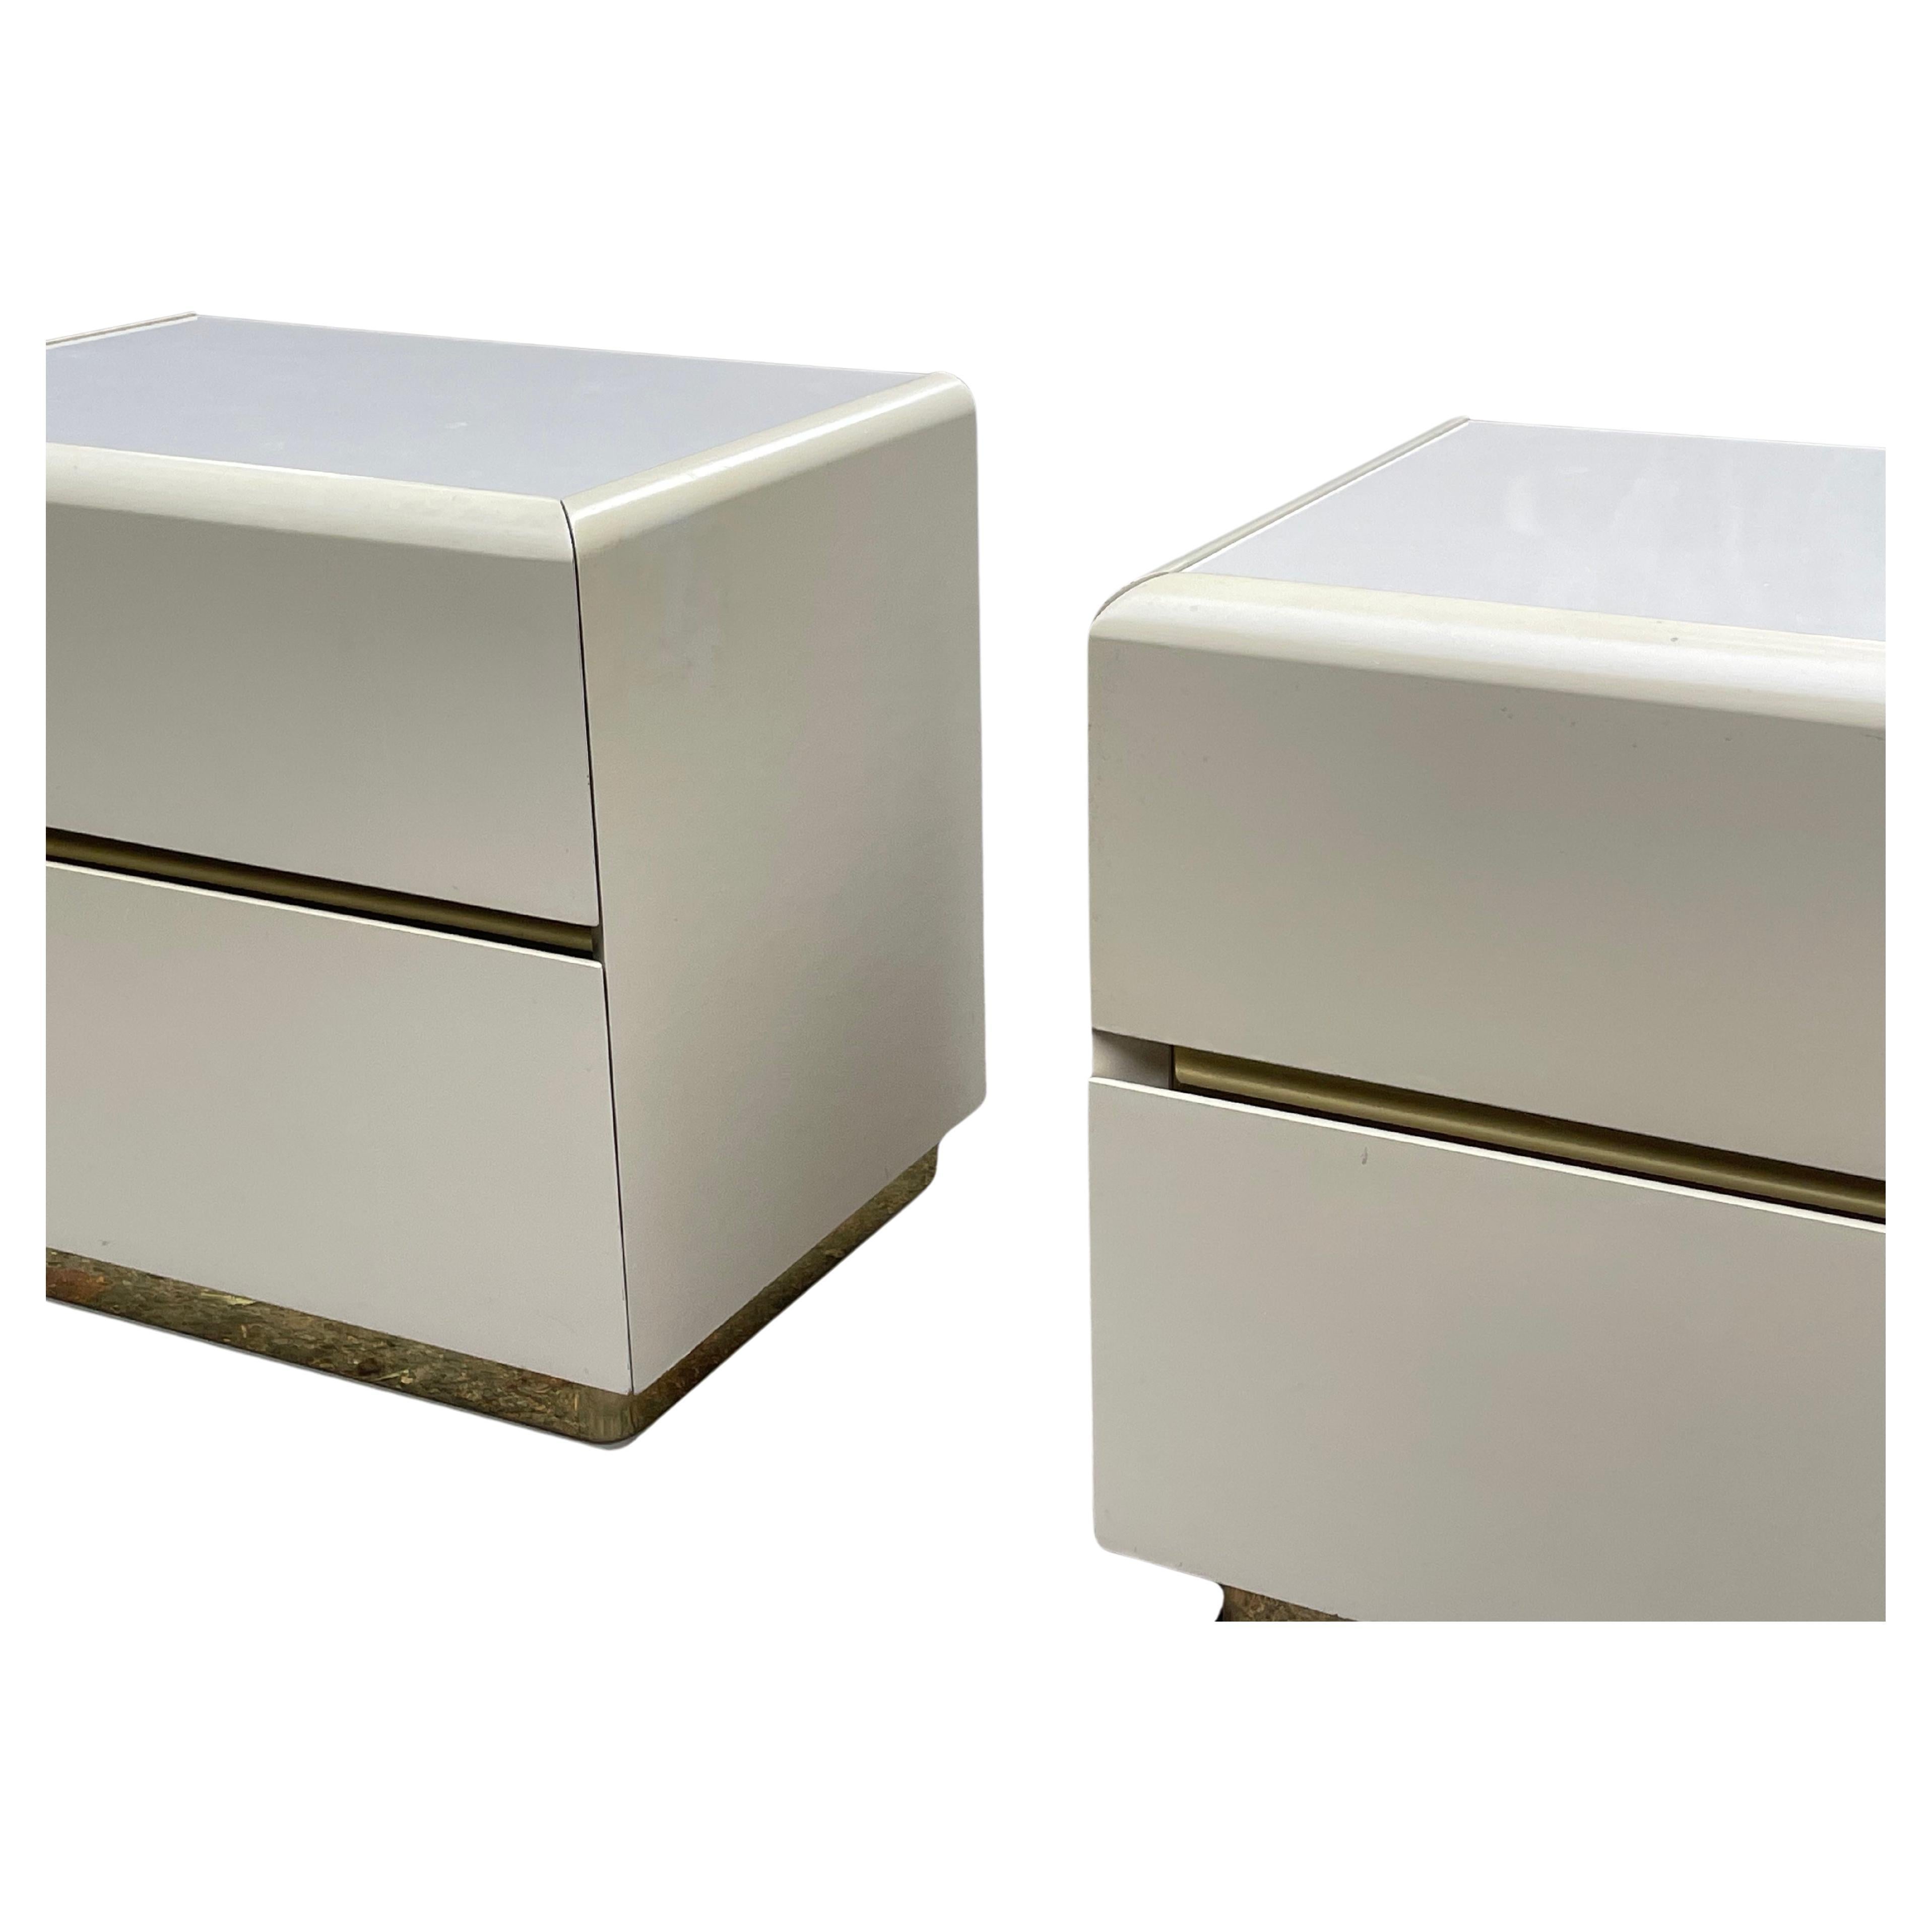 Late 20th Century Post-Modern Pair of Cream and Brass Lacquer 1980s Nightstands For Sale